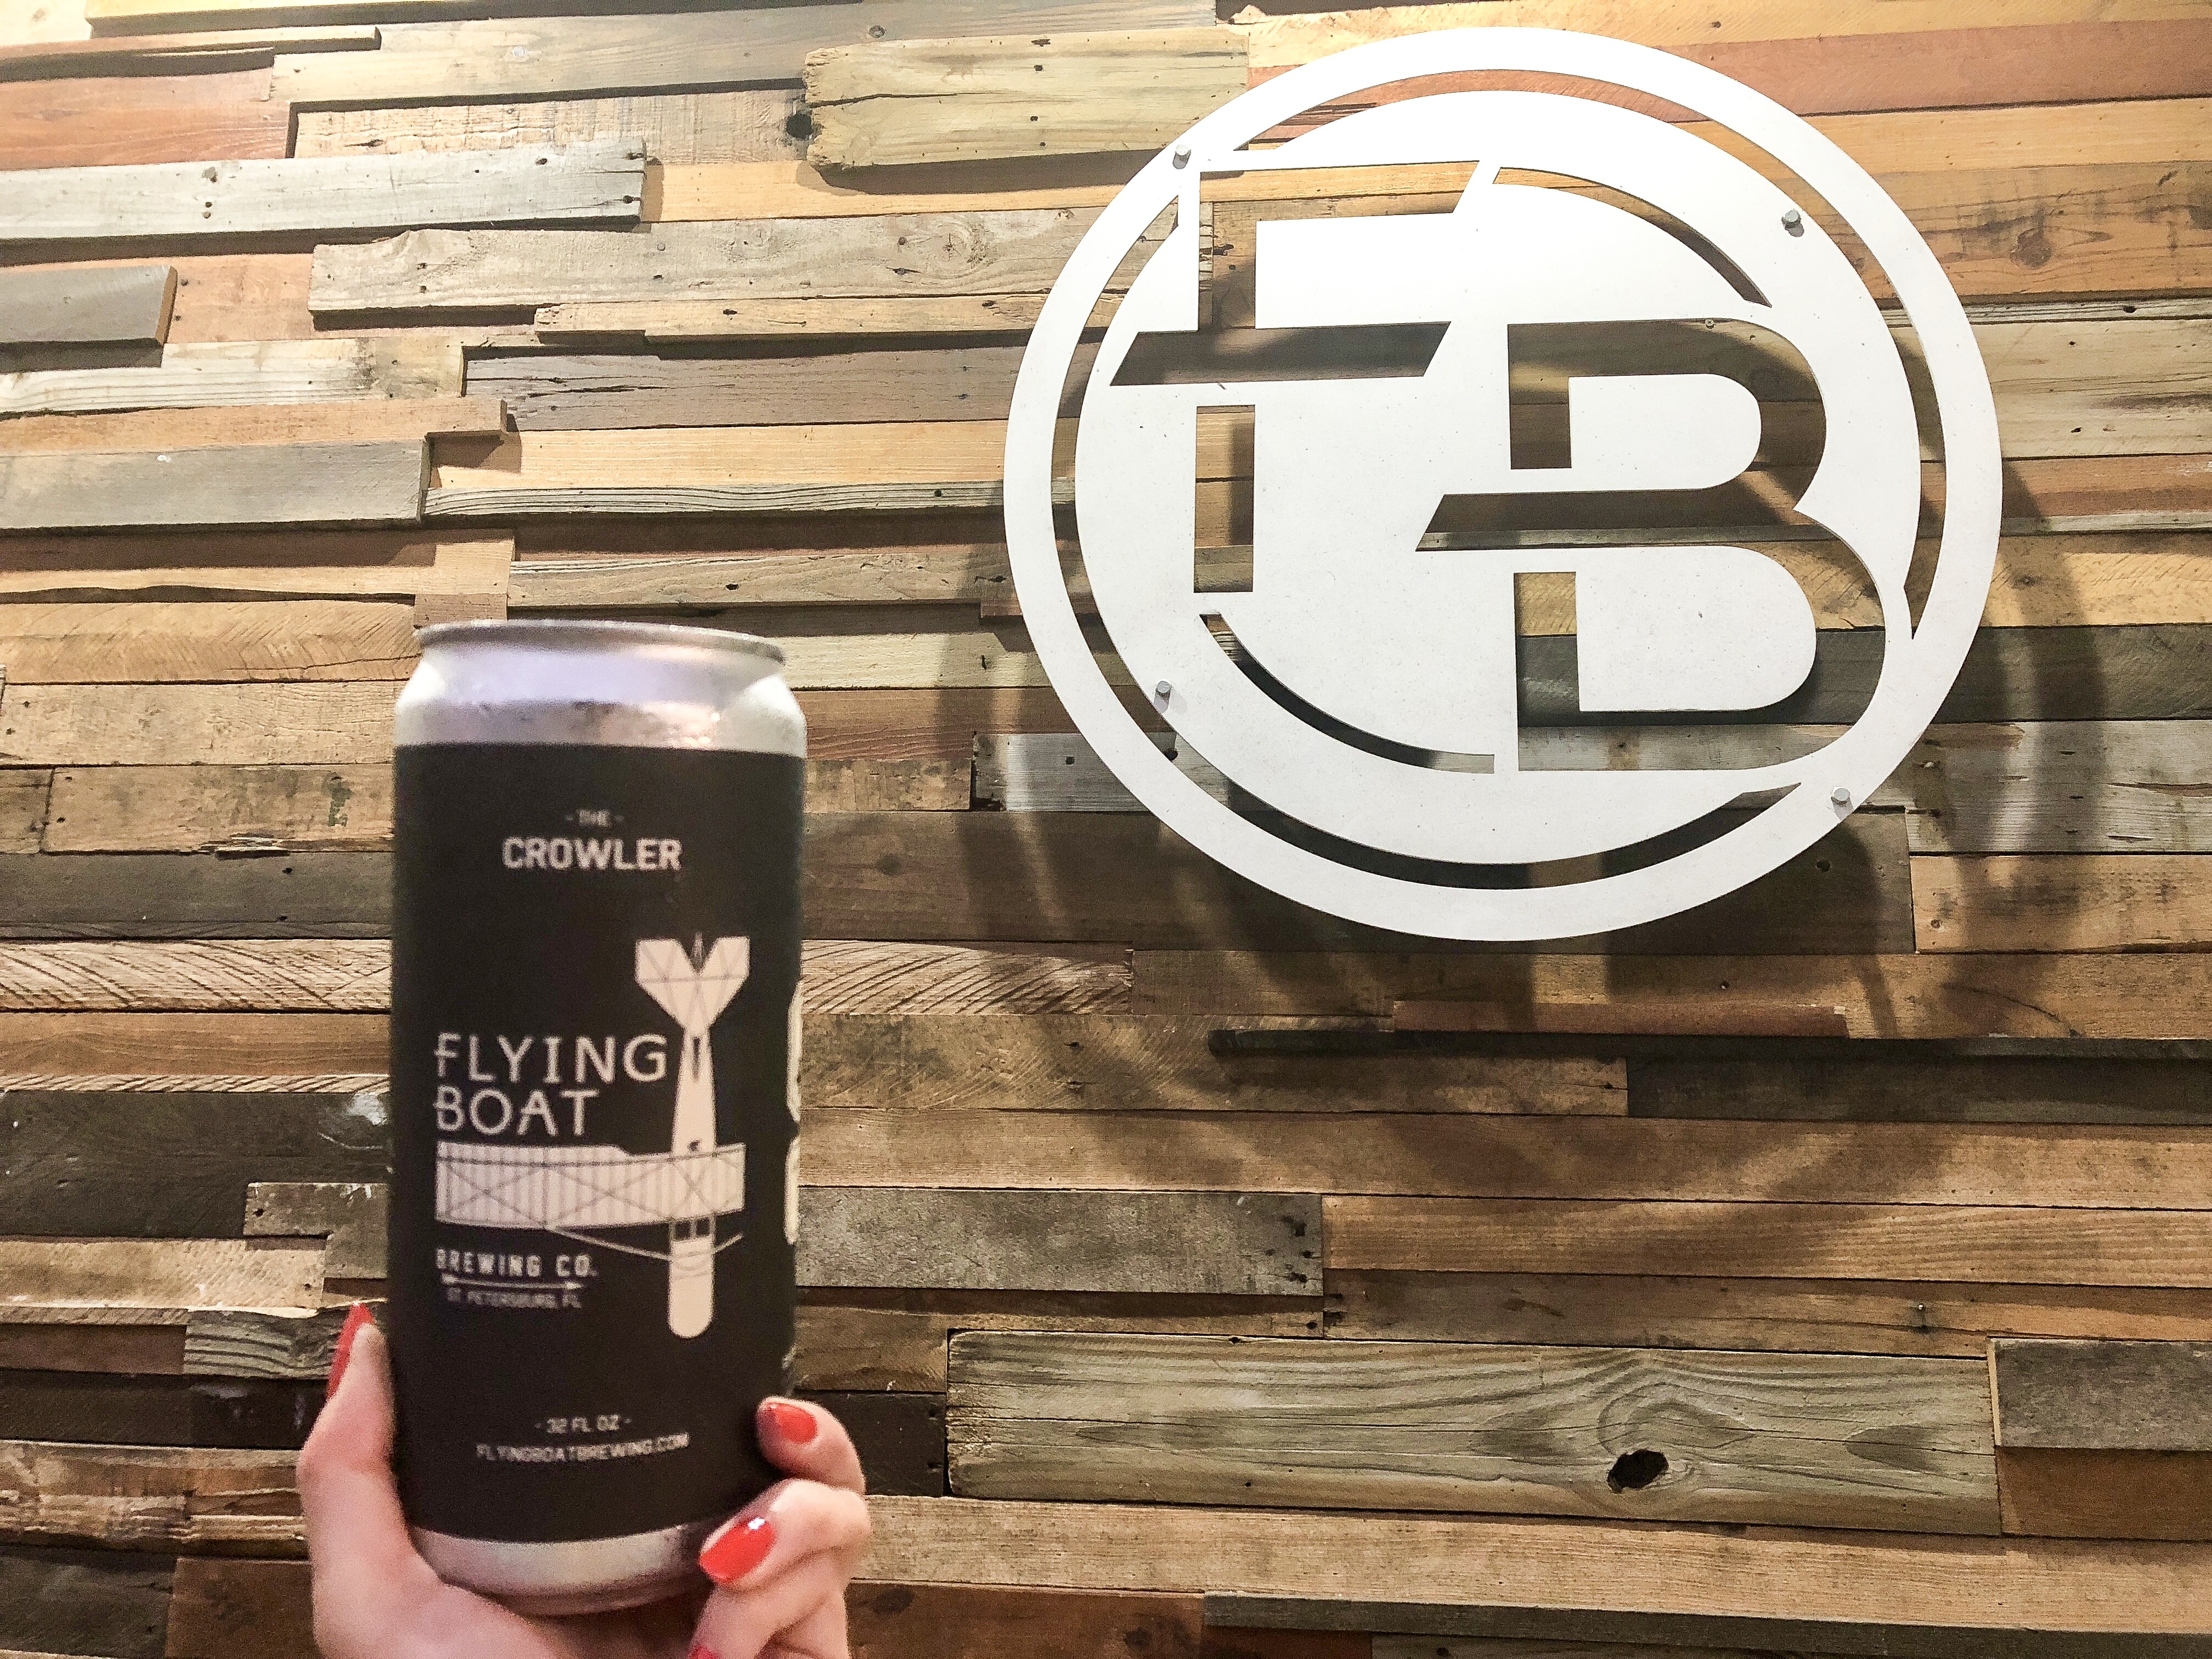 Crowler in front of Flying Boat